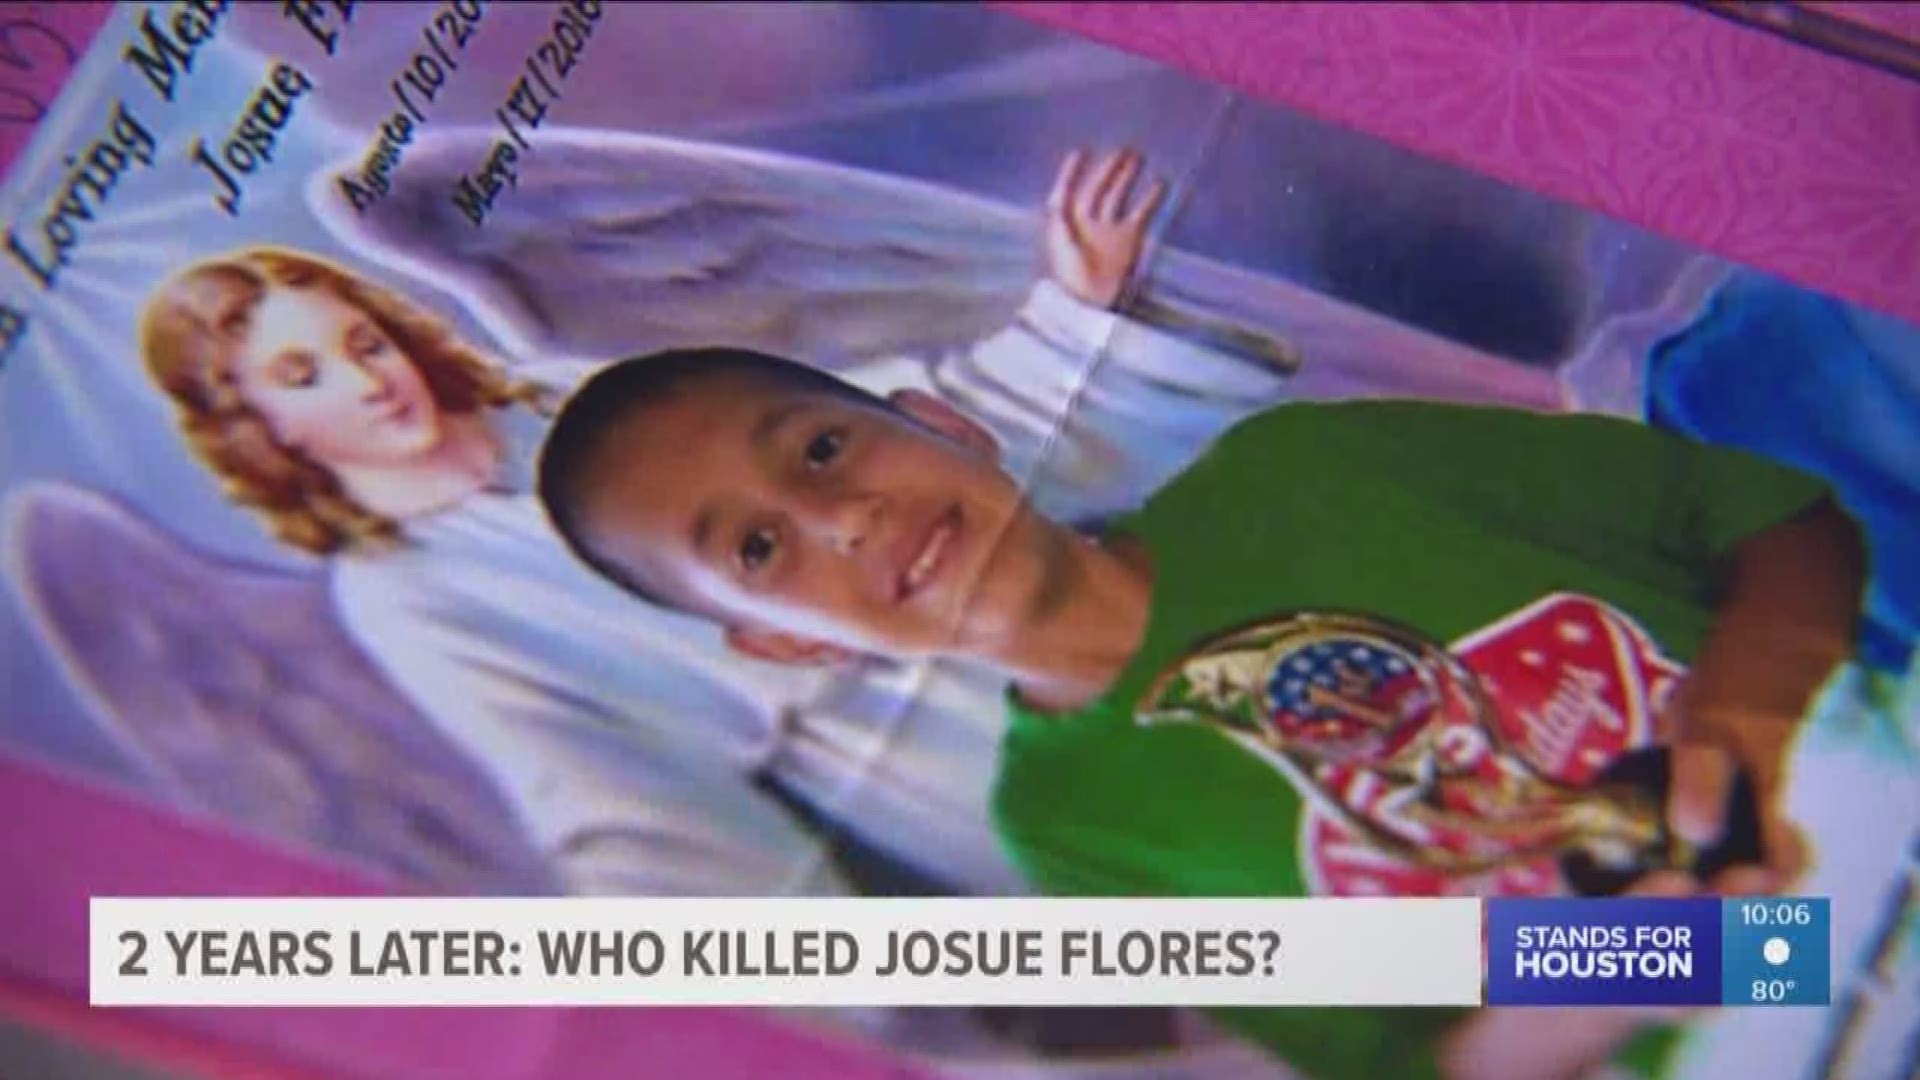 Long after the funeral, the vigils and the immediate community outrage, police and prosecutors concede the case of Josue Flores's murder is at a standstill.